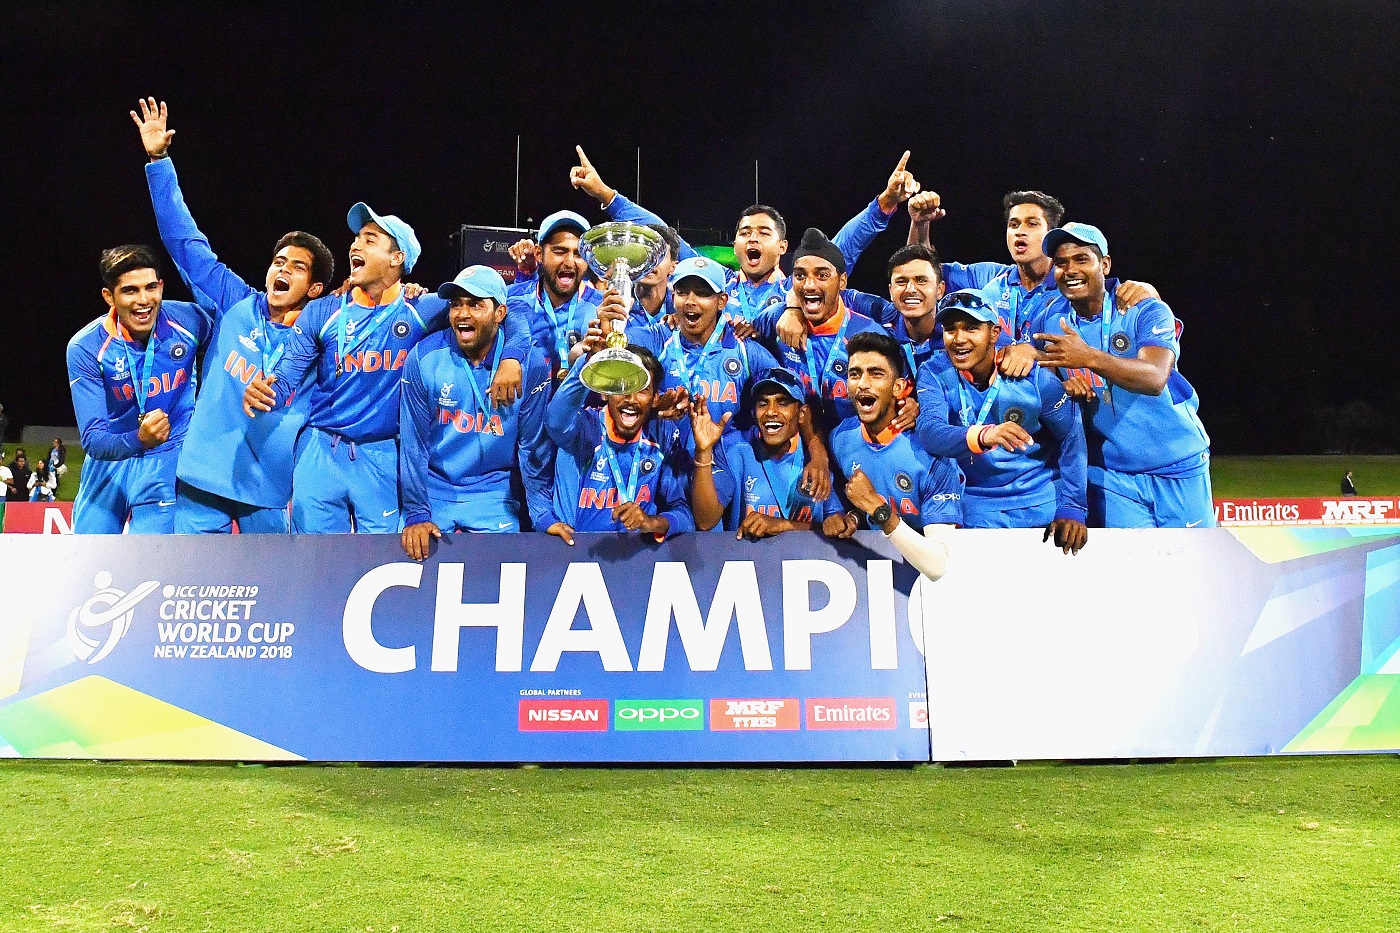 Icc Under 19 World Cup Icc U 19 Wc 17 18 Score Match Schedules Fixtures Points Table Results News